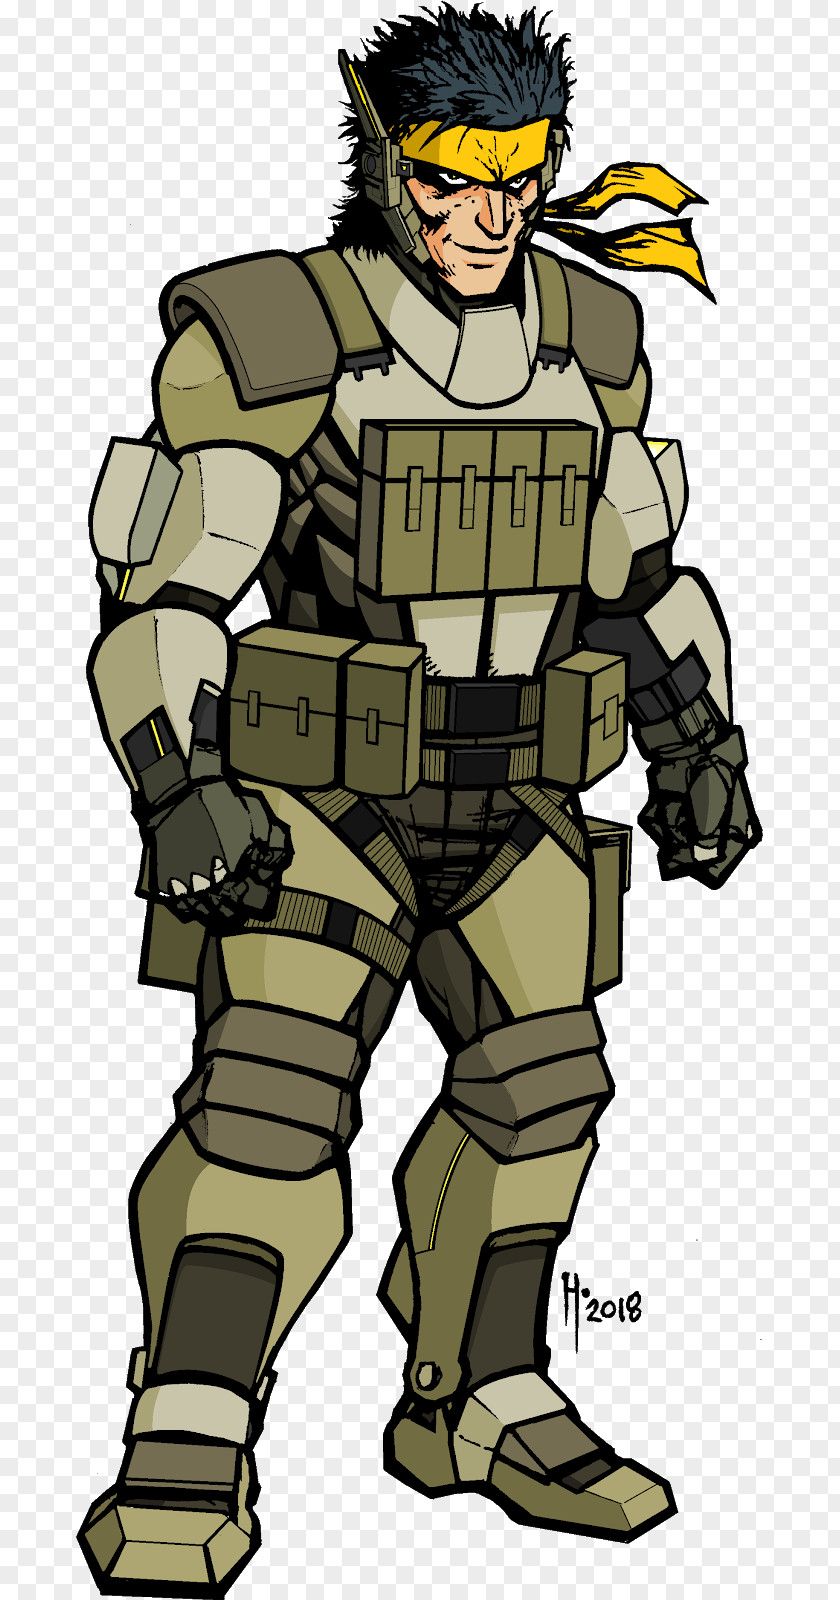 Solid Snake Mgs Character Clip Art Illustration Soldier Fiction PNG